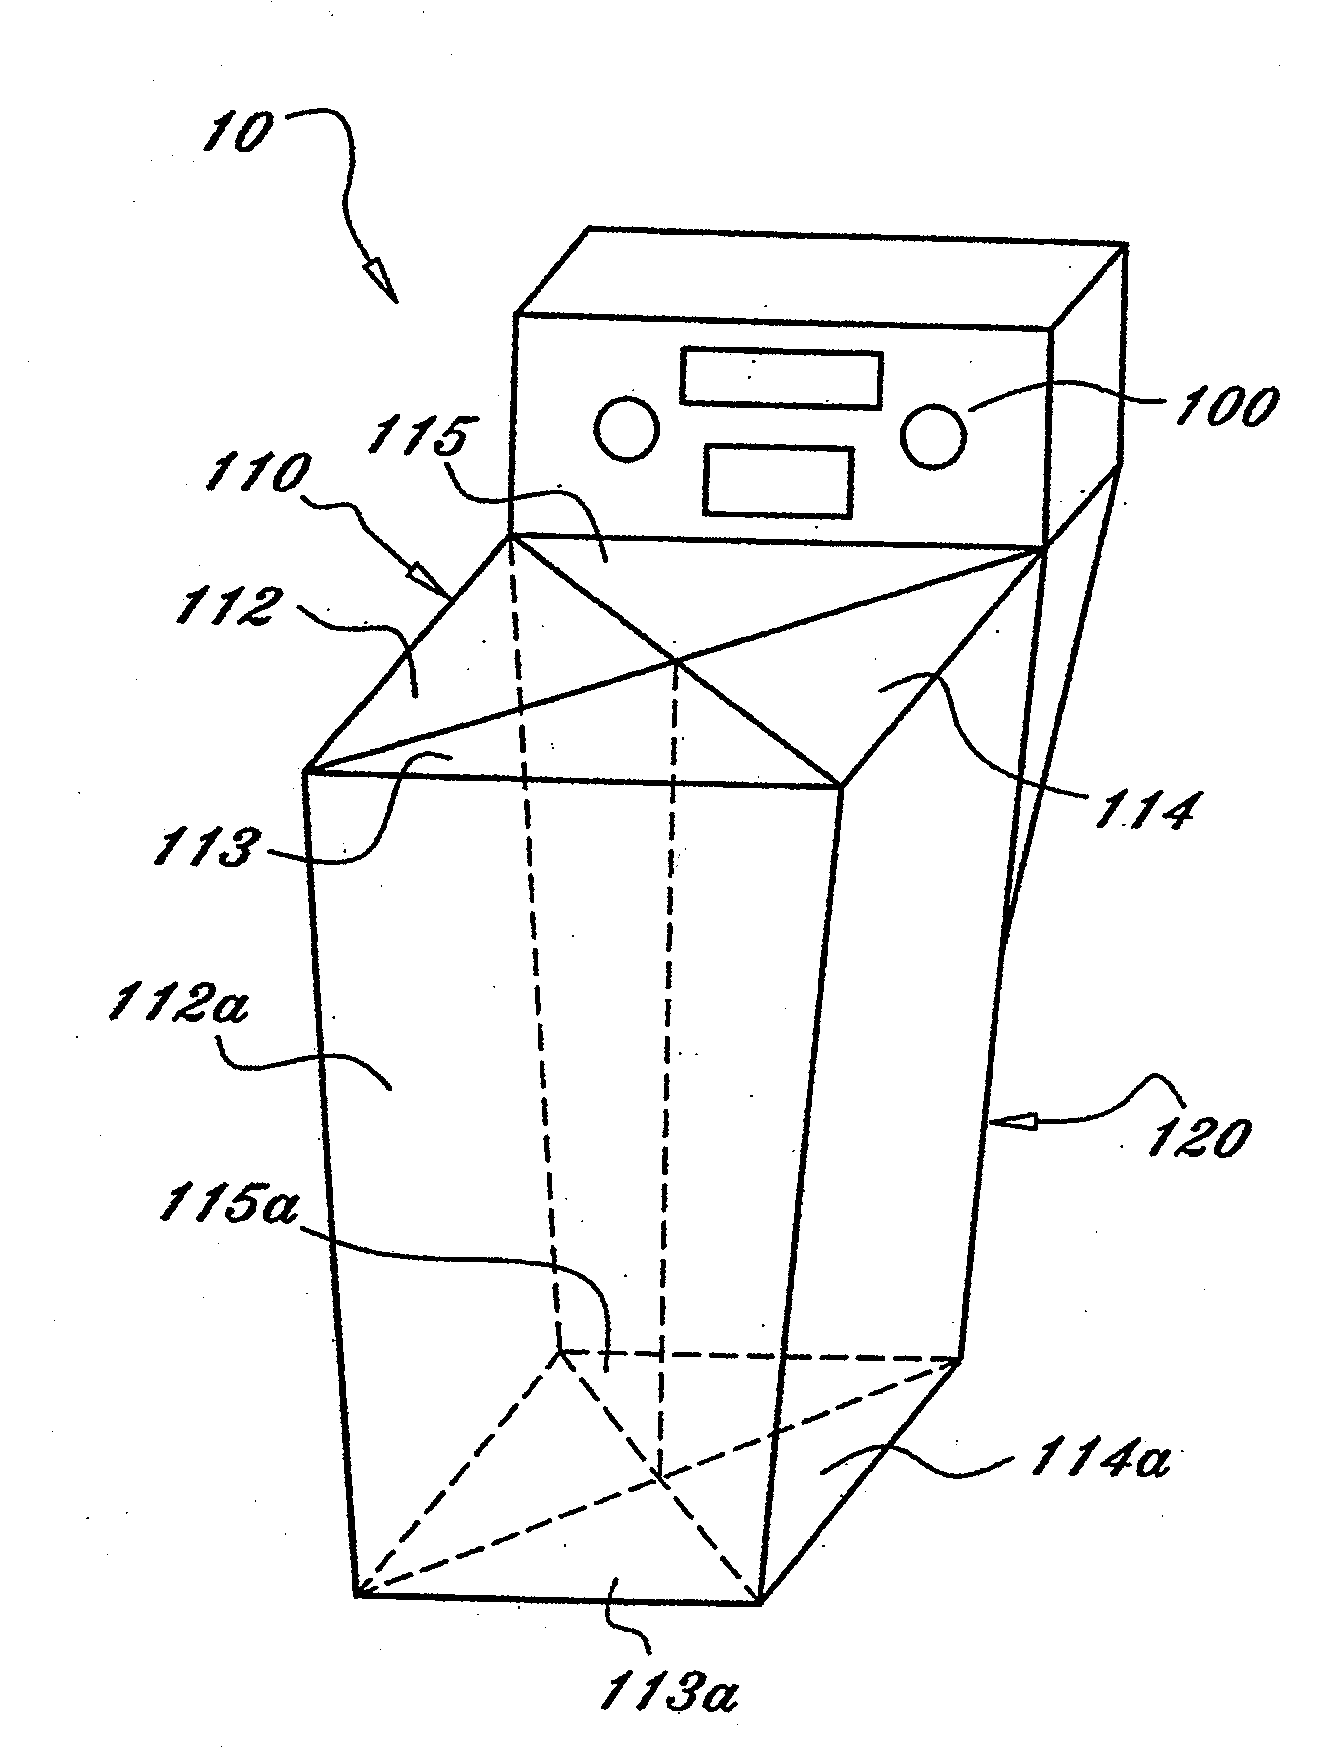 Networked waste processing apparatus